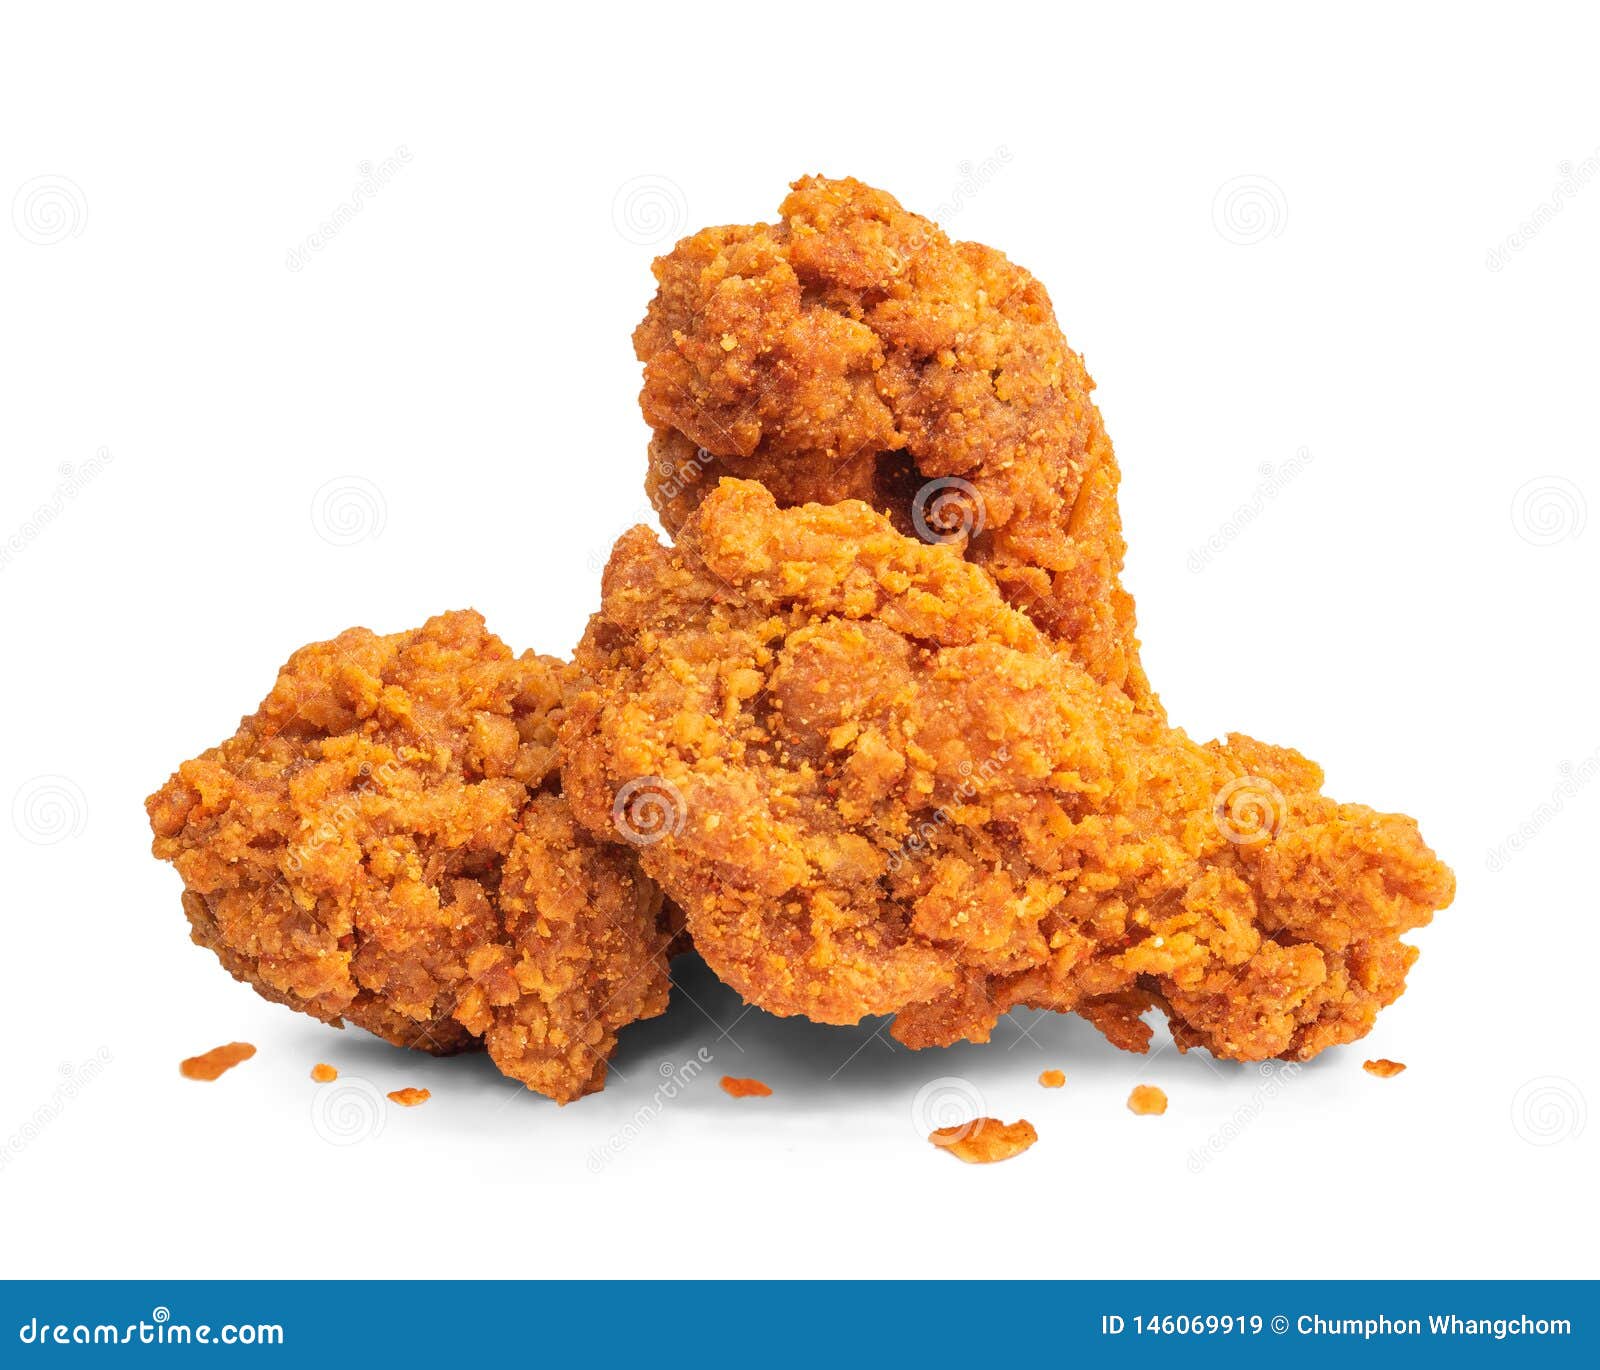 fried chicken legs  on white background. deep fried of crispy fast food. clipping path